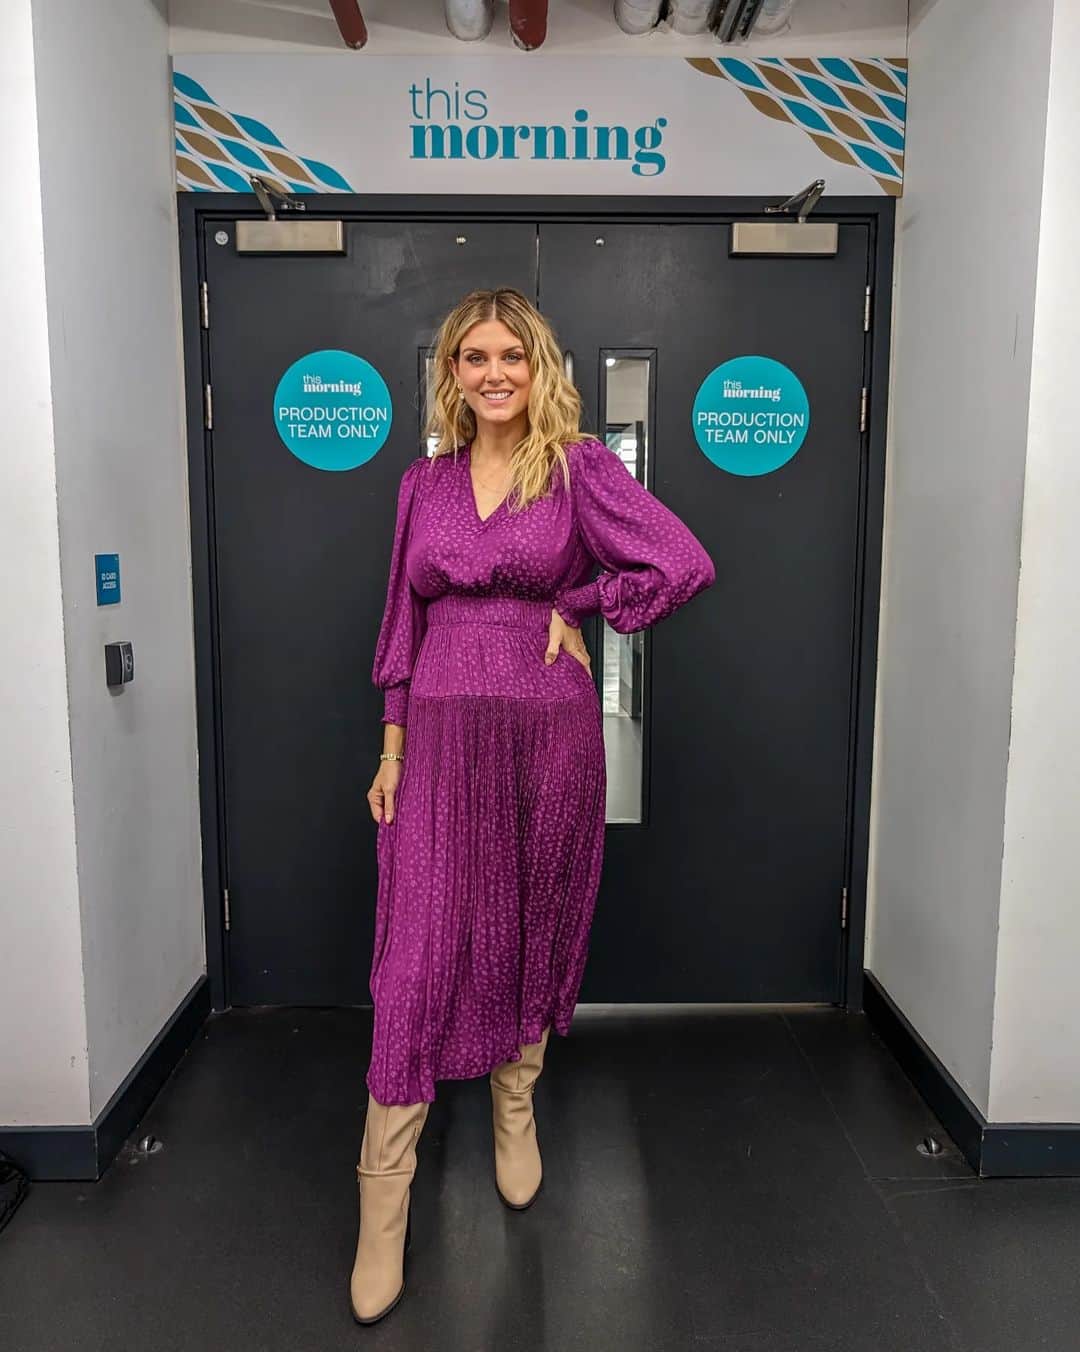 Ashley Jamesのインスタグラム：「Spending this morning on This Morning. 🤪💜 Absolutely LOVED being back on @thismorning today - and guys that's only the second coolest thing that happened today because...  GERI HALLIWELL TOLD ME I LOOKED AWESOME. SCREAM! Can I put that on my resume?✌🏼  Anyway I'm so chuffed to have been invited back on the most iconic sofa. And thank you for all the lovely messages I've read. It means so much honestly - especially after another night of broken sleep with Ada. ✨  This Morning we discussed the fact that the army are to overturn the beard ban - this will have my gran rattled because she bloomin' hates beards. She's been at my brother to shave his since he grew it out. 🤪 We also talked about the fact that AI can turn your dead loved ones into a hologram - this is like Black Mirror turned real life. I really do see the need to cling onto our loved ones and there's people I'd love to talk to again, but I think it's a really slippery slope and I don't think it would allow people to grieve properly?  And on the more serious topics: Keir Starmer praising Margaret Thatcher. WHY KEIR WHY? I understand that with our right wing media politicians have to tow the line to win elections. I understand why he needs to get the support of middle of red wall votes disillusioned with the Tories BUT WHY BRING UP SUCH A DIVISIVE CHARACTER? He could take his pick of things to talk about - NHS waiting times, cuts to public services, party gate, immigration. There ar endless ways he could speak to people. Personally I'd love to see some authenticity and no bullsh*t in opposition. Someone who rips through the lies and corruption of the Conservatives who we desperately need out. Someone who doesn't stoke division and culture wars. Come on Keir, we don't need to keep talking about Margaret Thatcher. Especially not from Labour. Tell us how you're going to make our lives better!  And finally we talked about Megan and Harry and Omid Scobie's book naming the royals. What do you think? Pr stunt? A mix up? Personally I wish we could focus on more important things!  Anyway love love love sitting on that sofa and thank you Emma Willis and Rylan for making me feel so welcome! 💜💜💜」